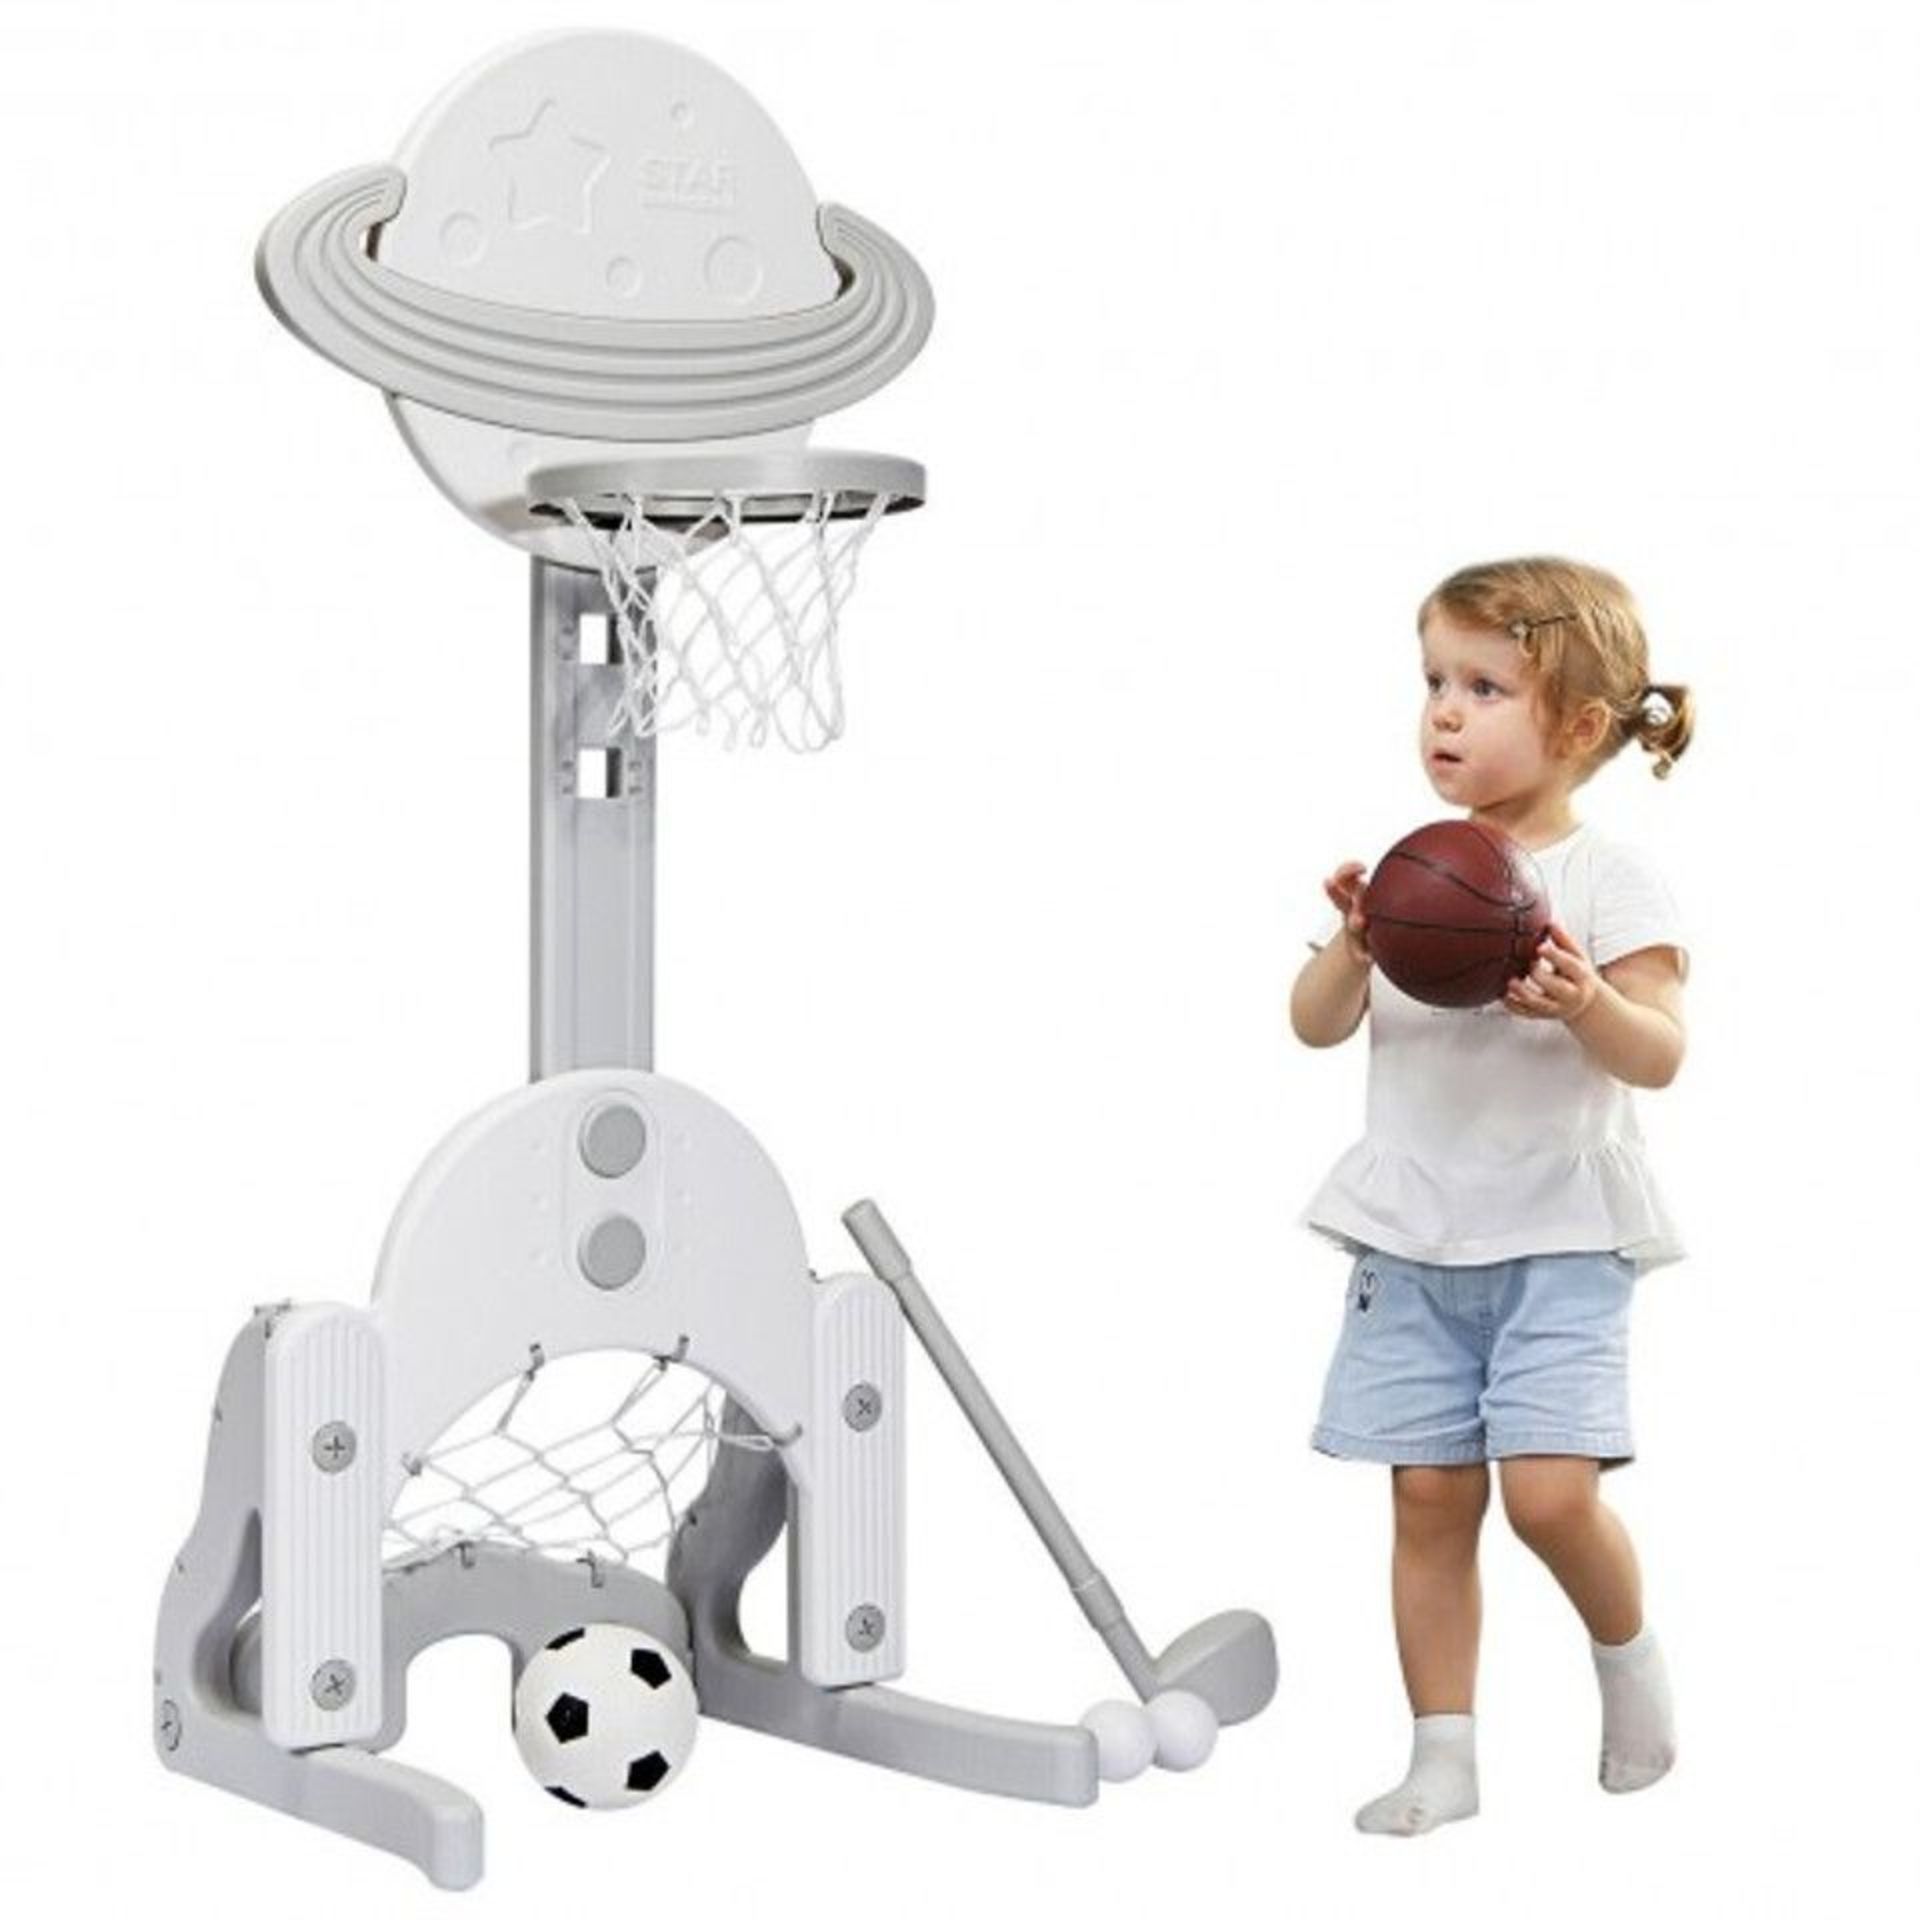 3 In 1 Kids Basketball Hoop Set With Balls. - R14.6. This stylish star basketball stand is